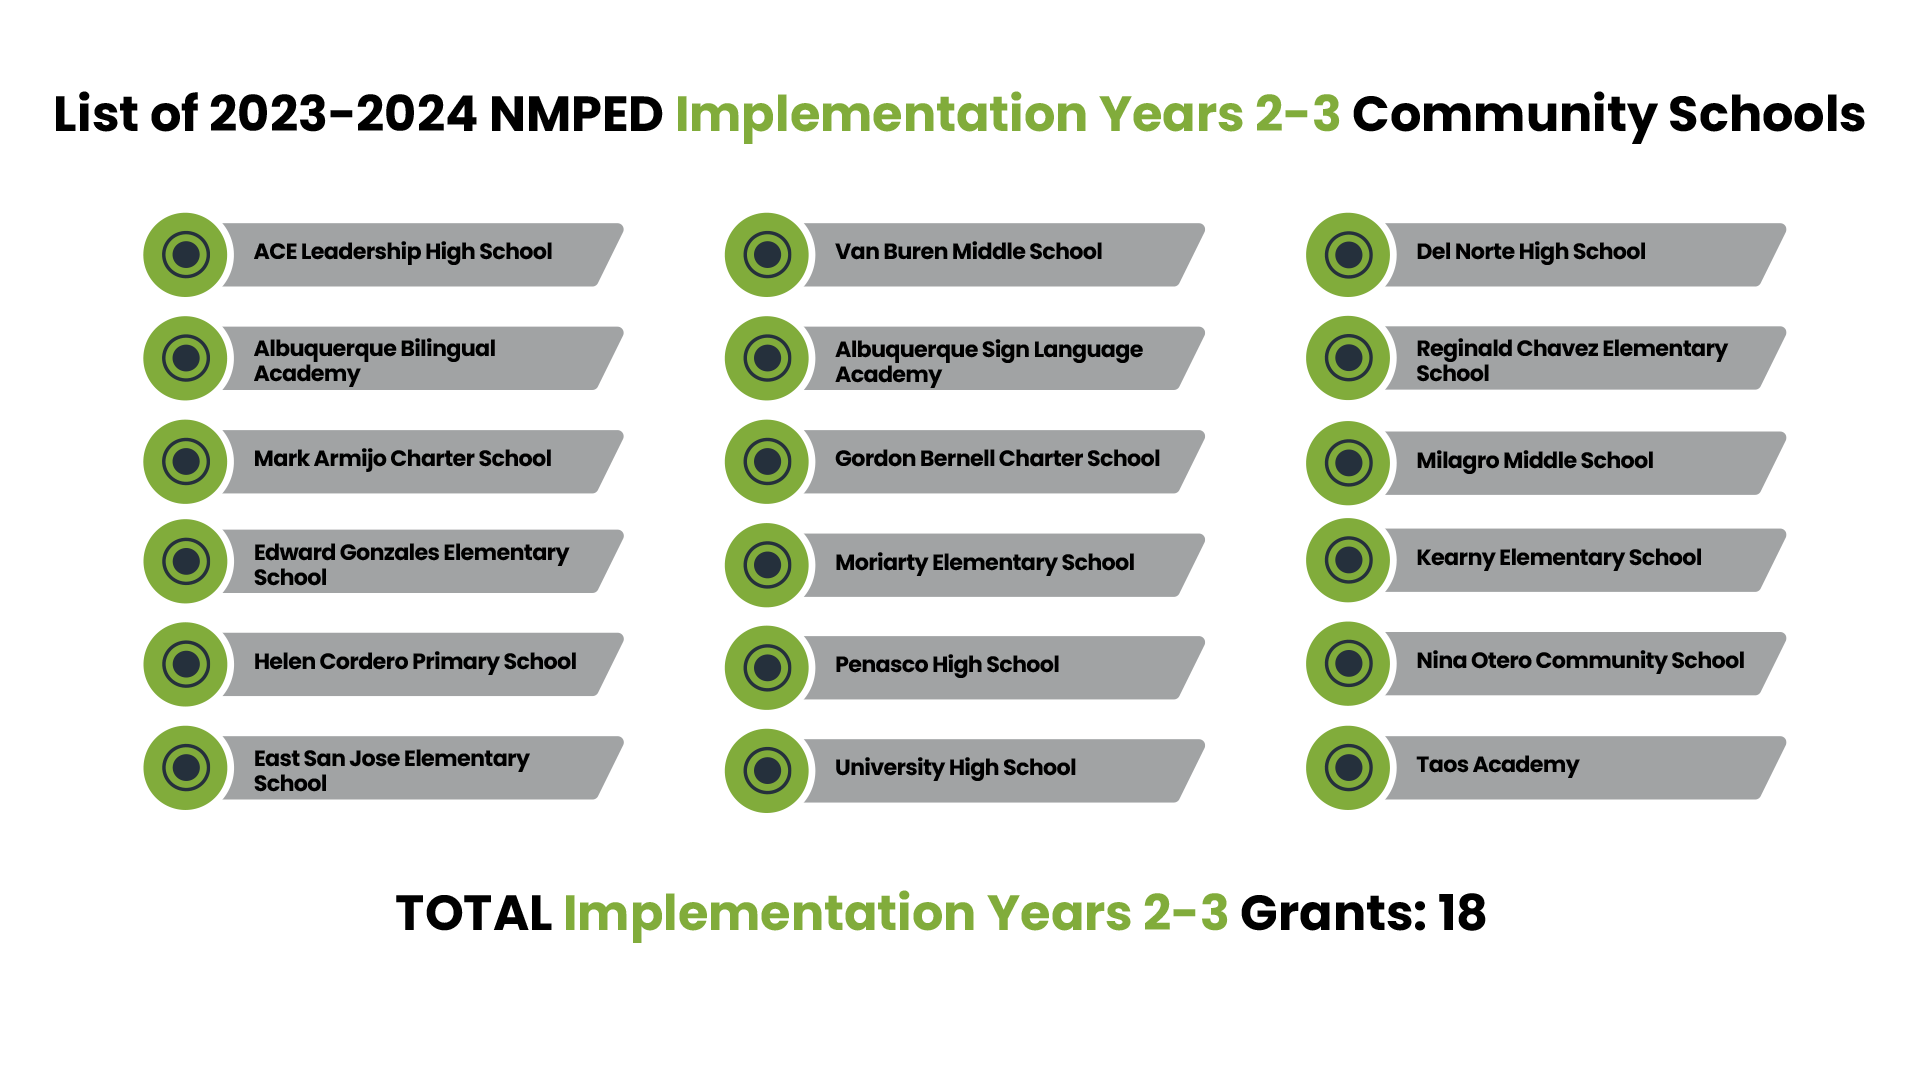 Community Schools Implementation Years 2-3 Grant Awards